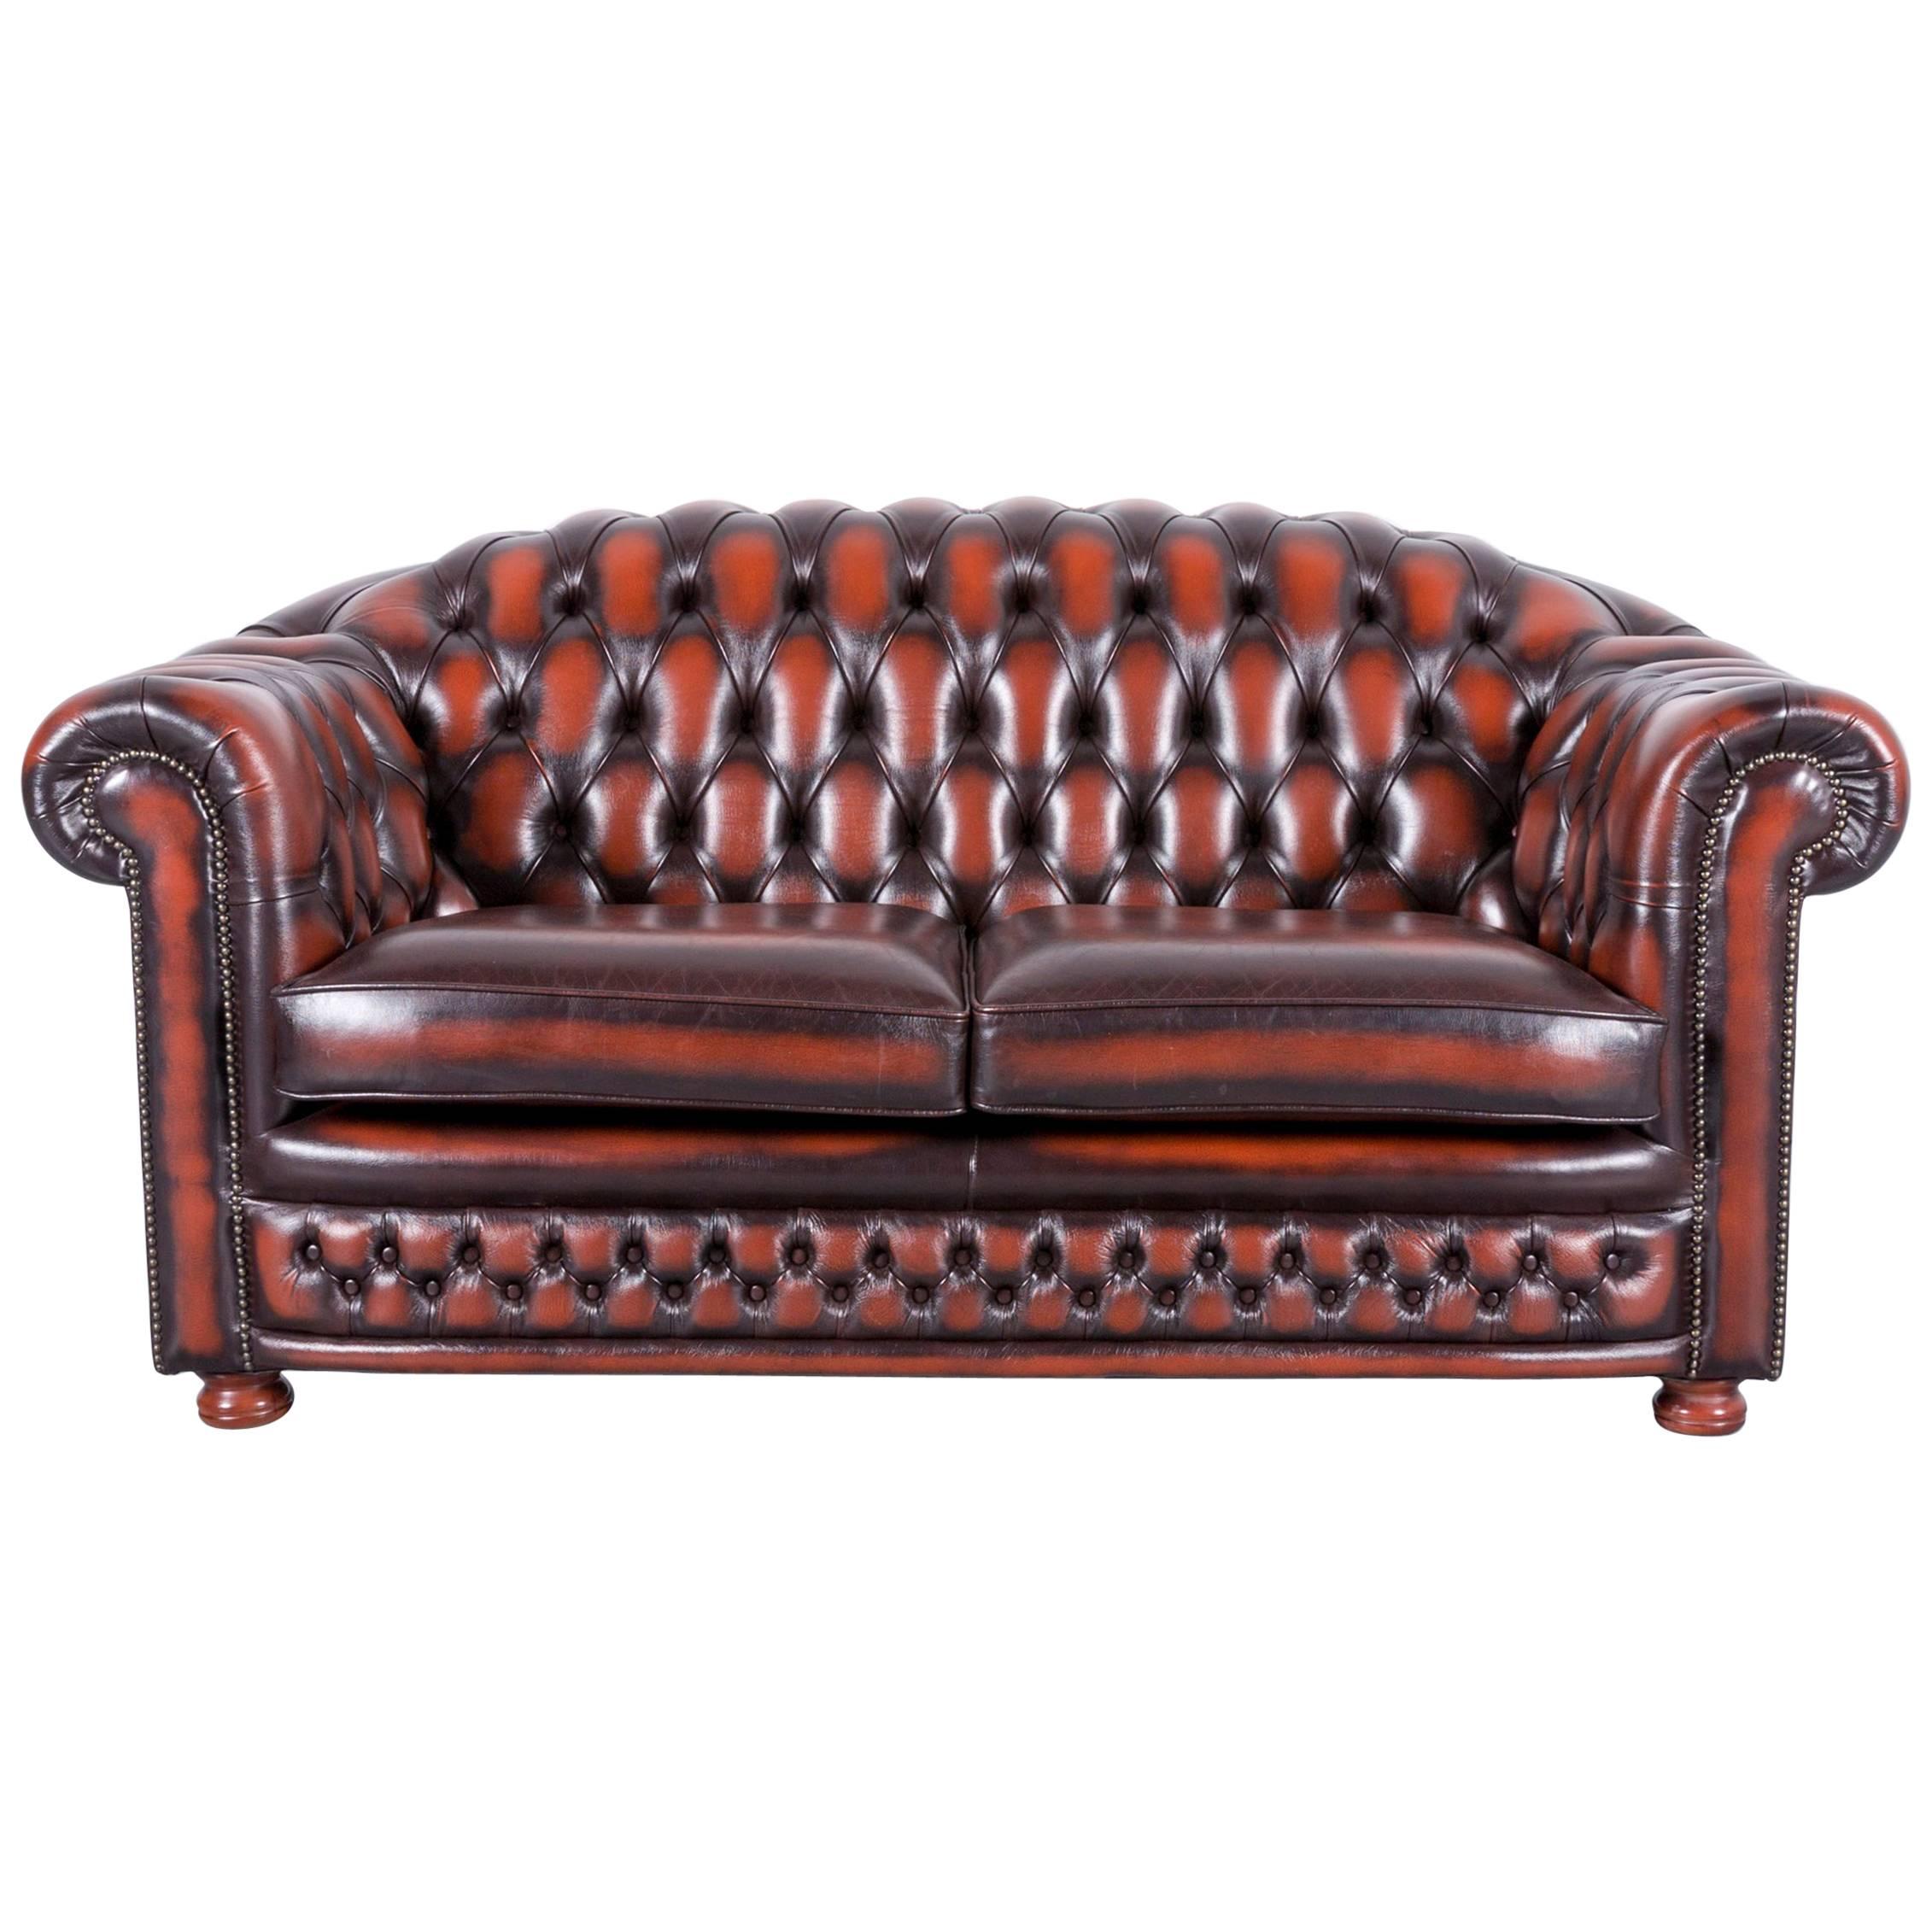 Chesterfield Leather Sofa Brown Orange Two-Seat For Sale